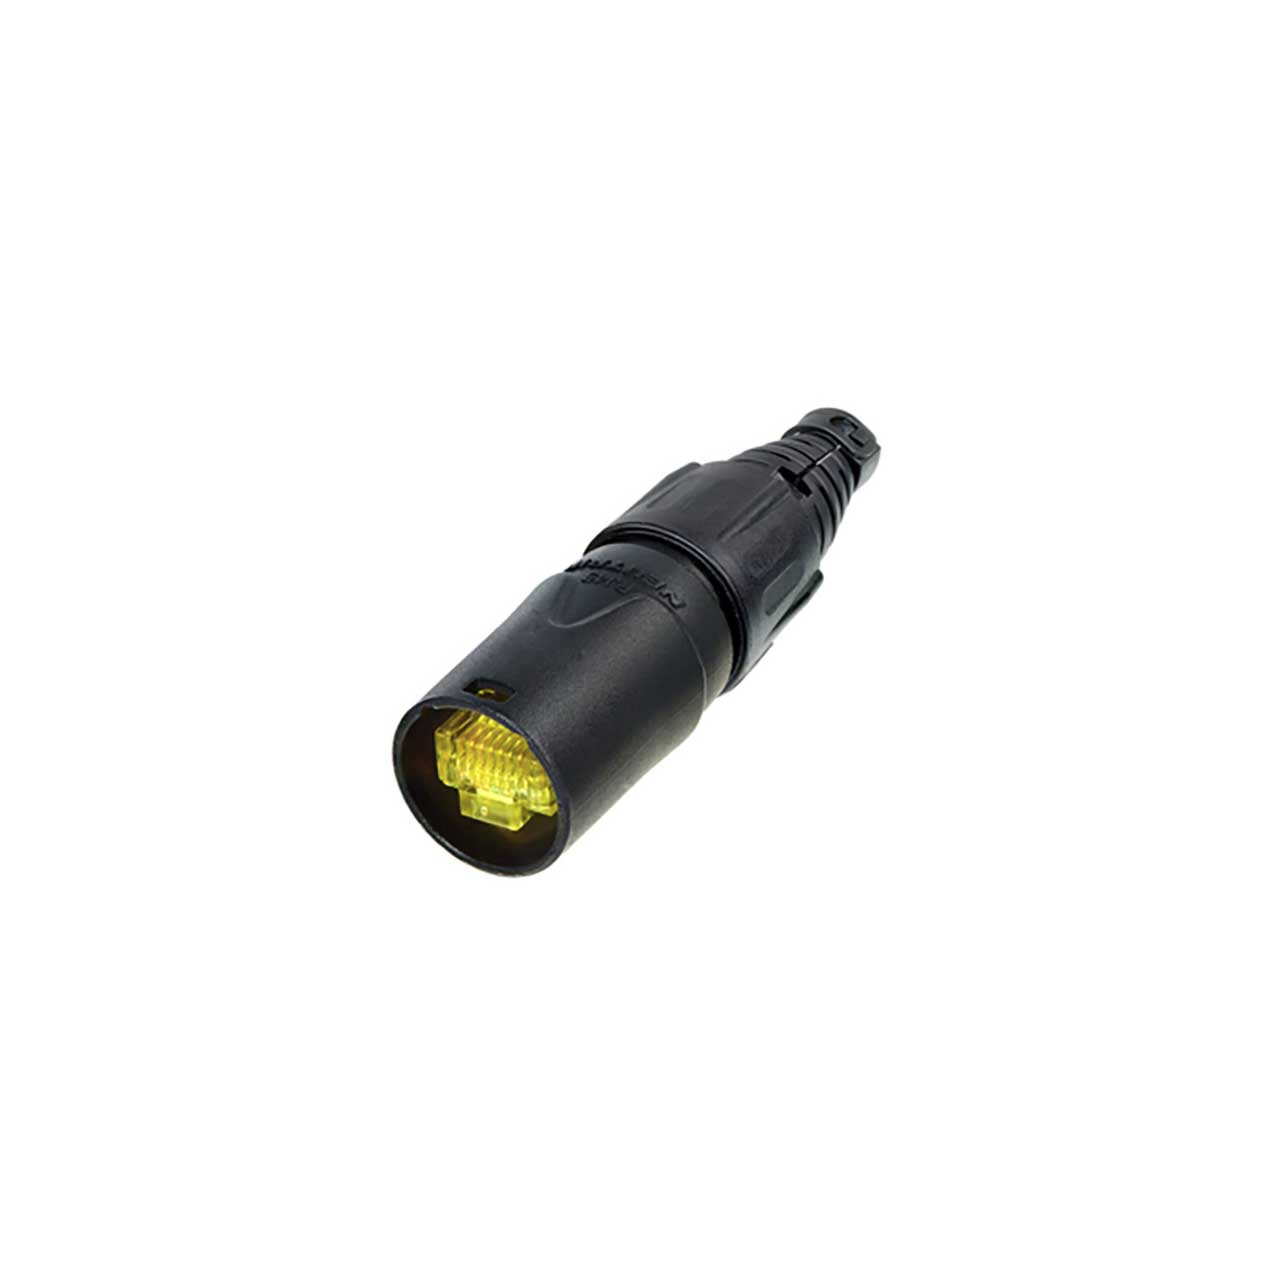 Neutrik NE8MX-B Cable End Connector Carrier X Series Black etherCON Shell Only - Requires RJ45 Connector and Cable